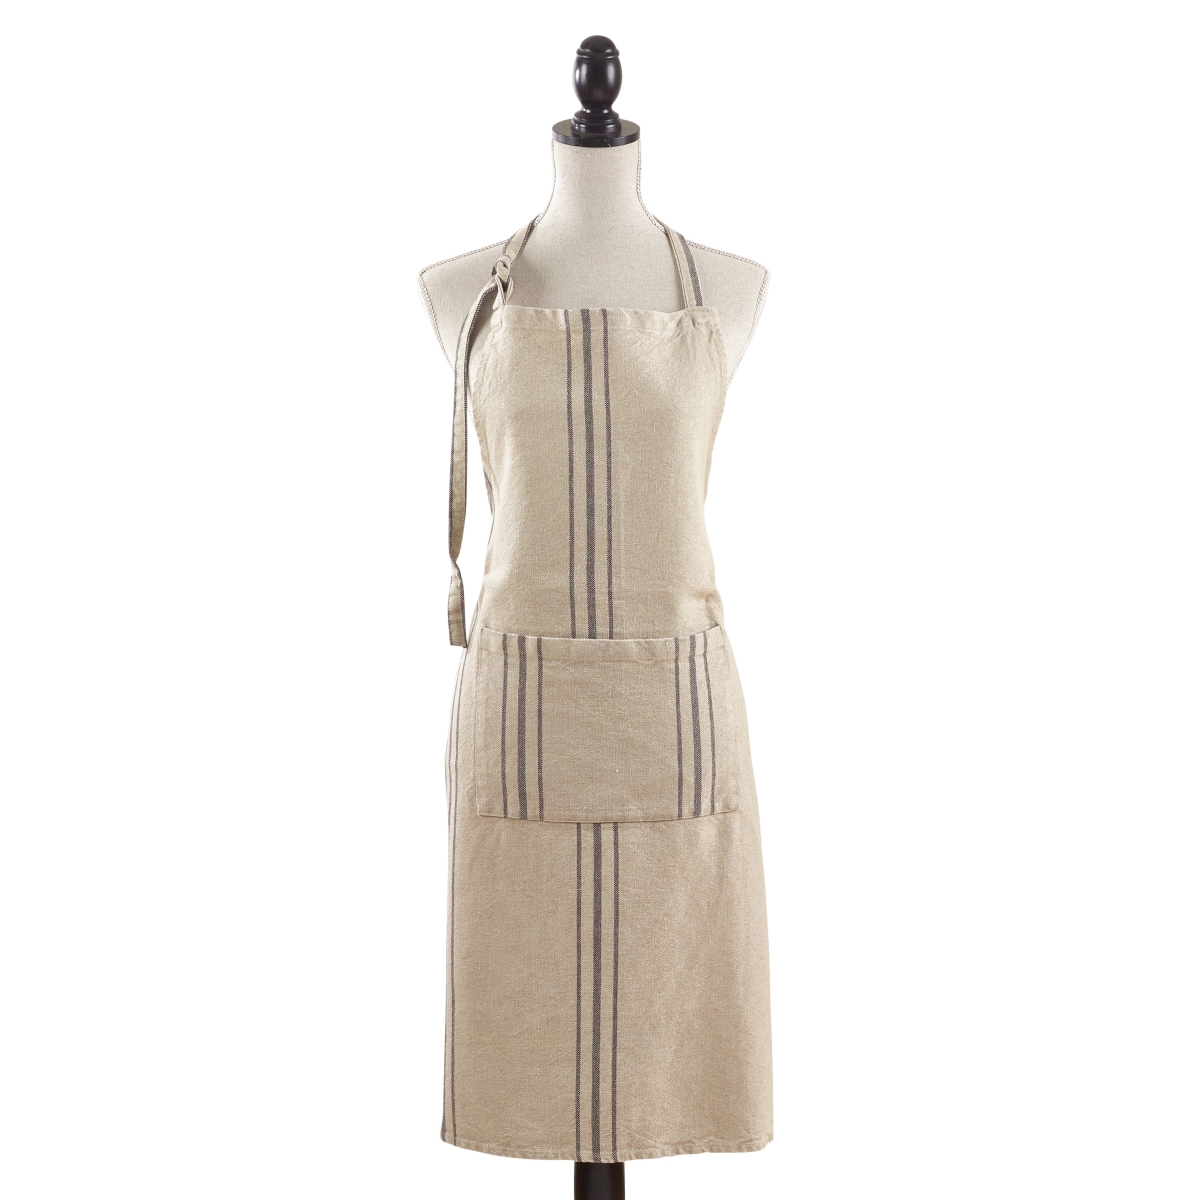 1117.n01 20 In. Classic Tie Striped Linen Apron - Natural